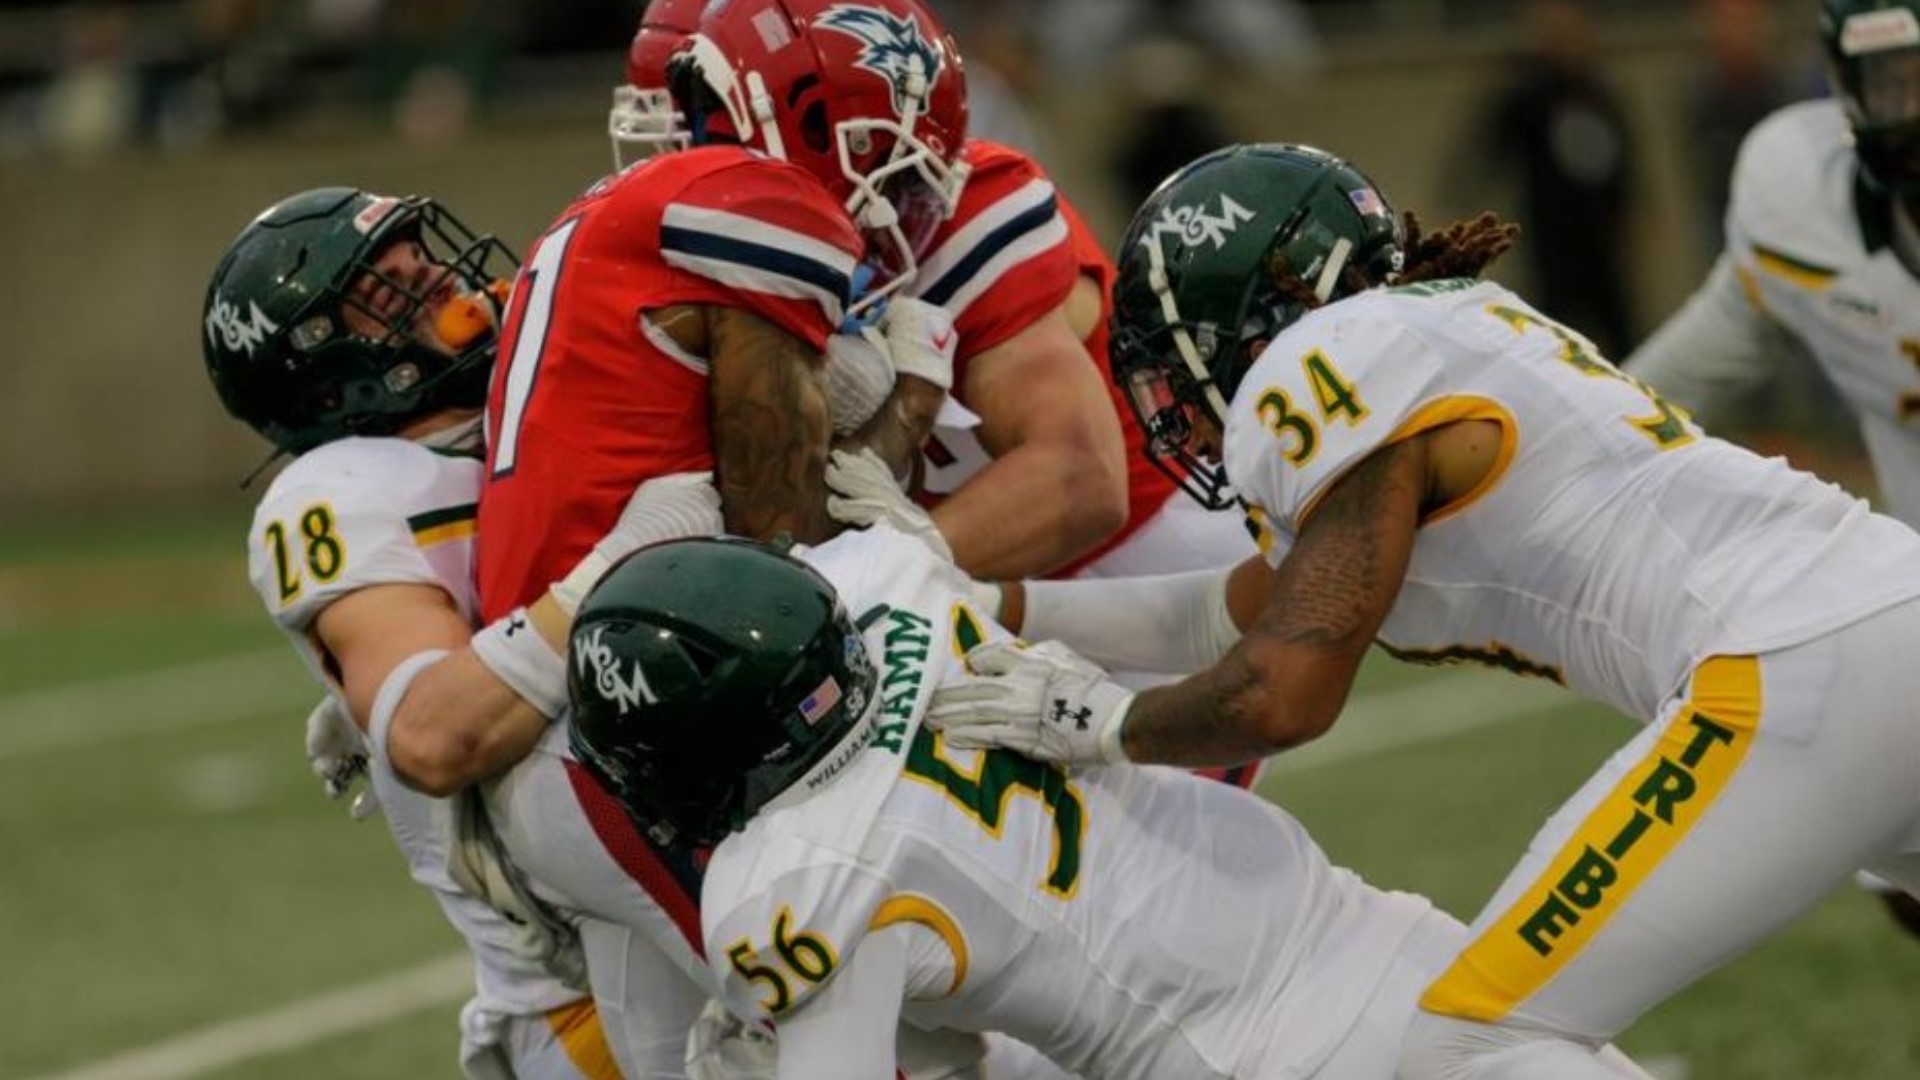 William & Mary comes off an impressive 27-10 win over Stony Brook for their first Colonial Athletic Association victory.